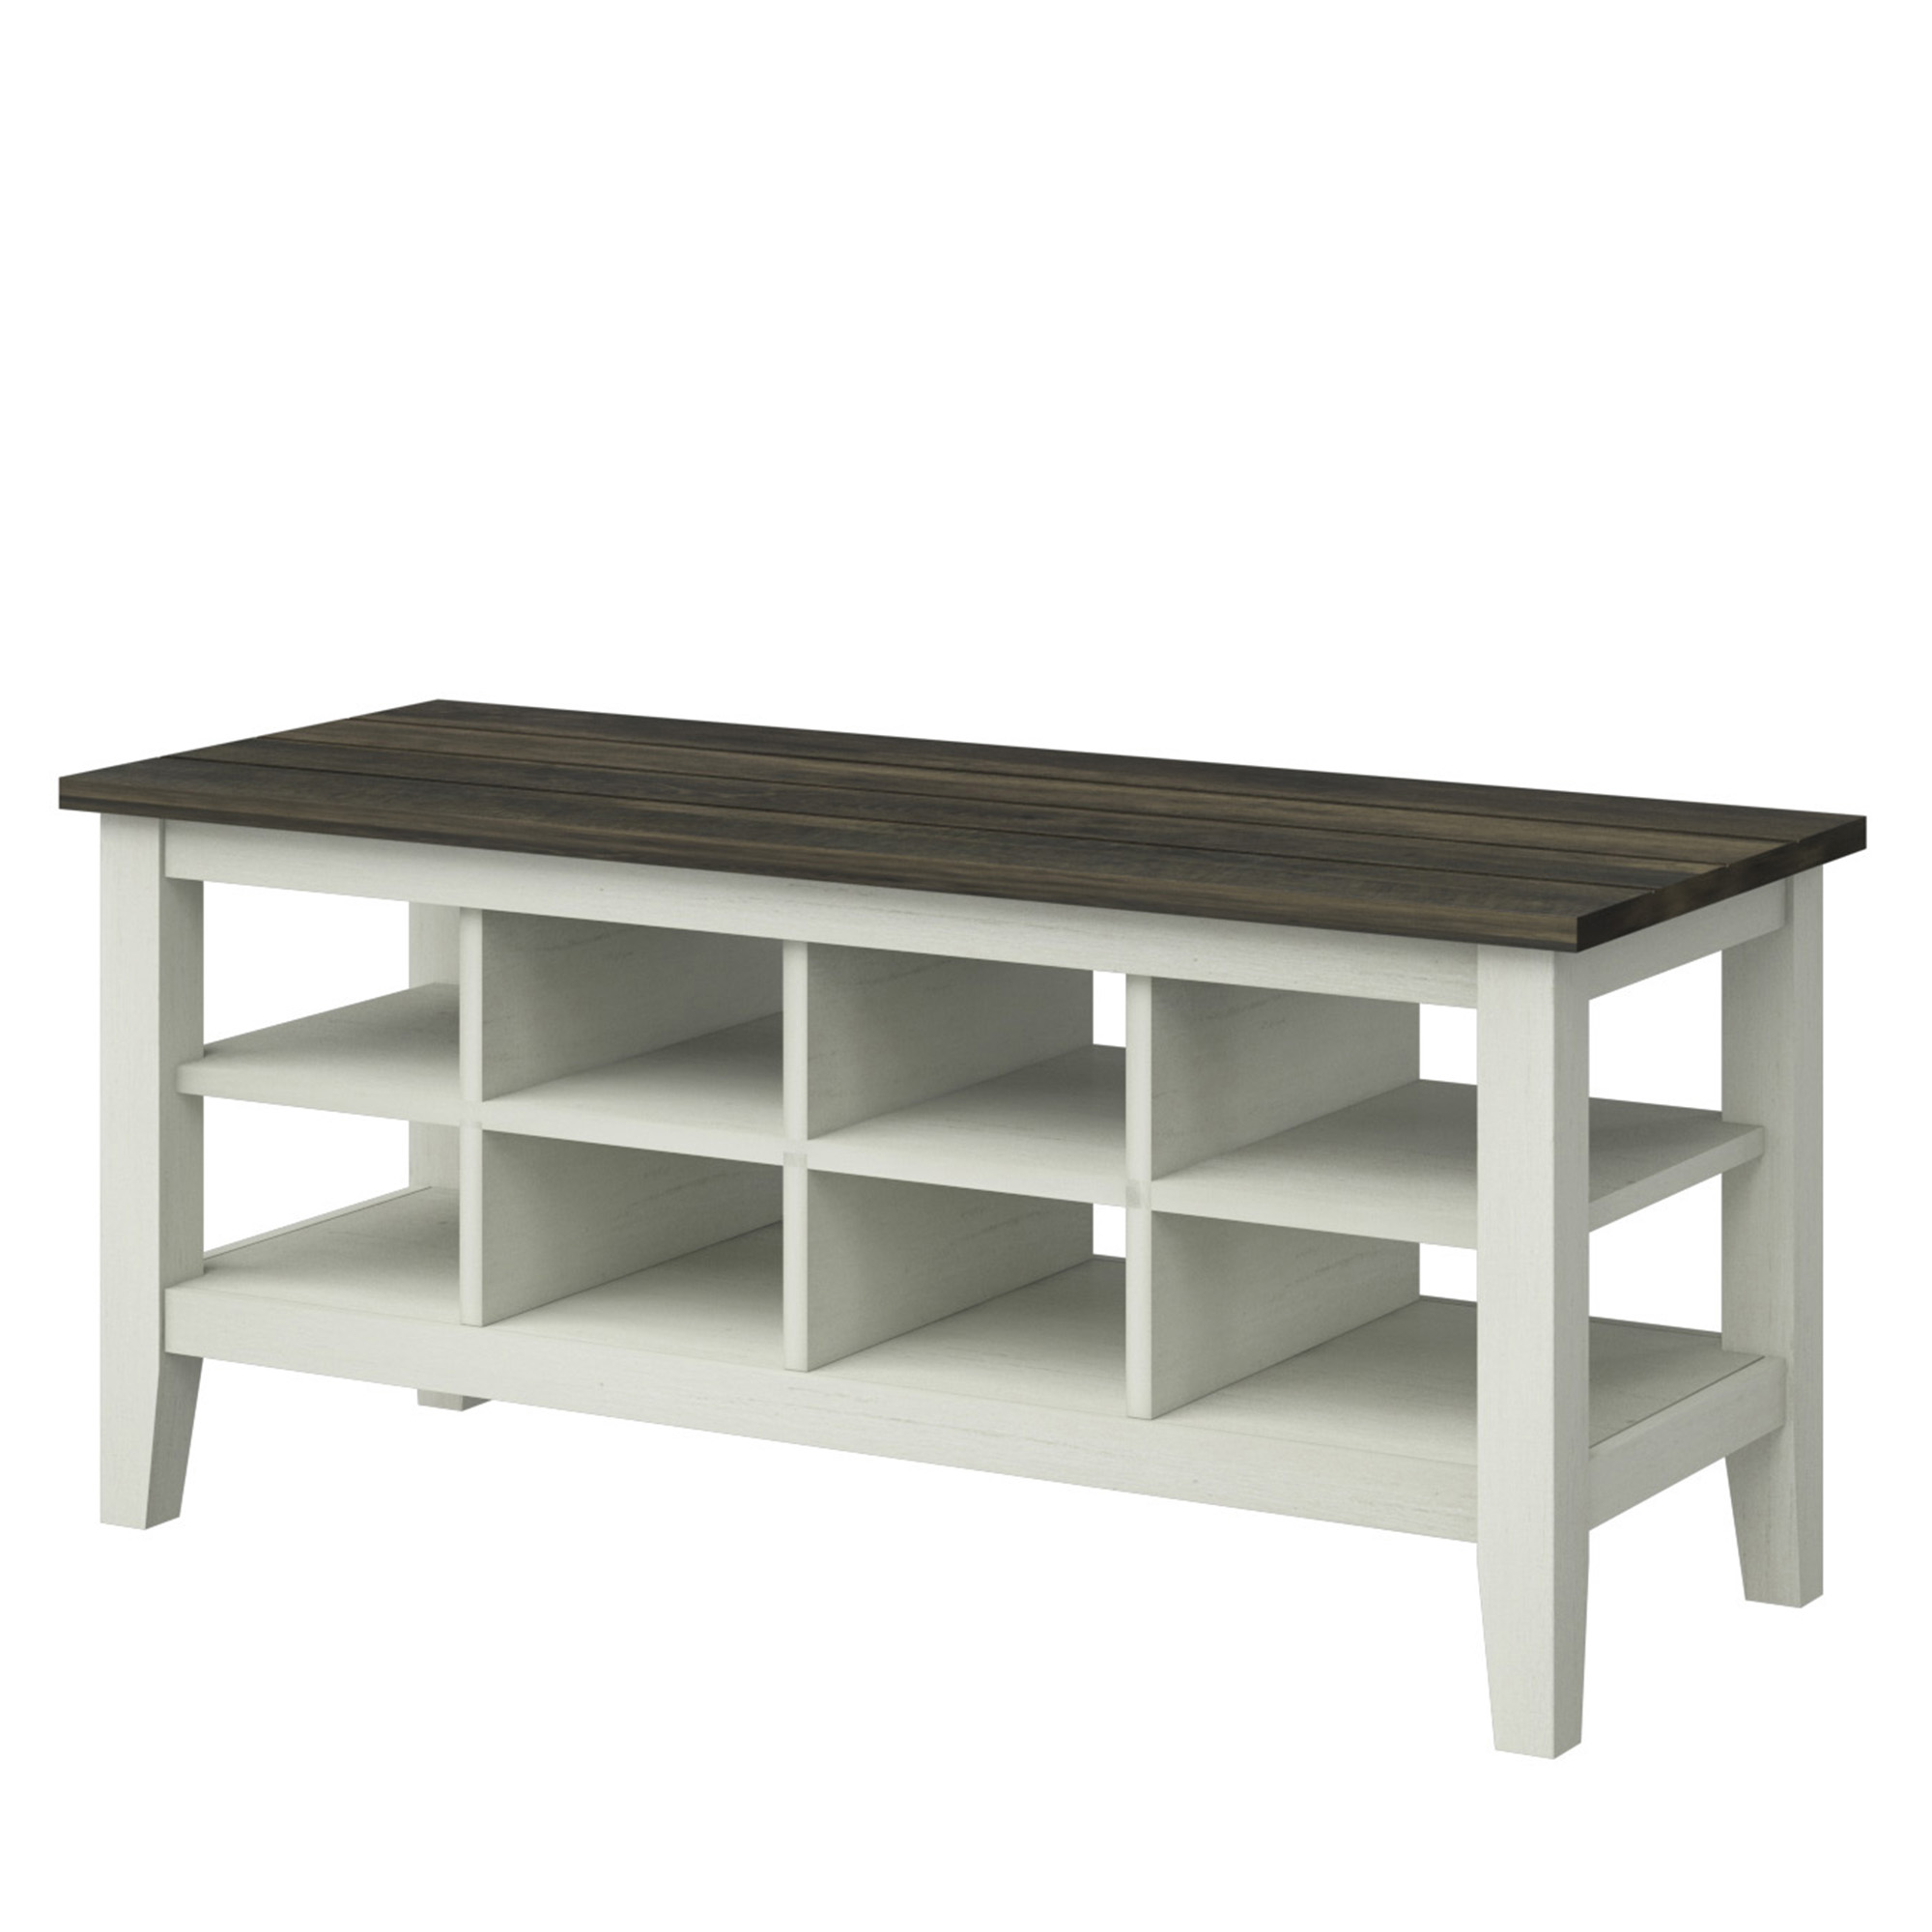 Twin Star Home Two-Tone Storage Bench with Planked Top in Old Wood White, 40”W x 15.5”D x 17.8”H - image 5 of 7